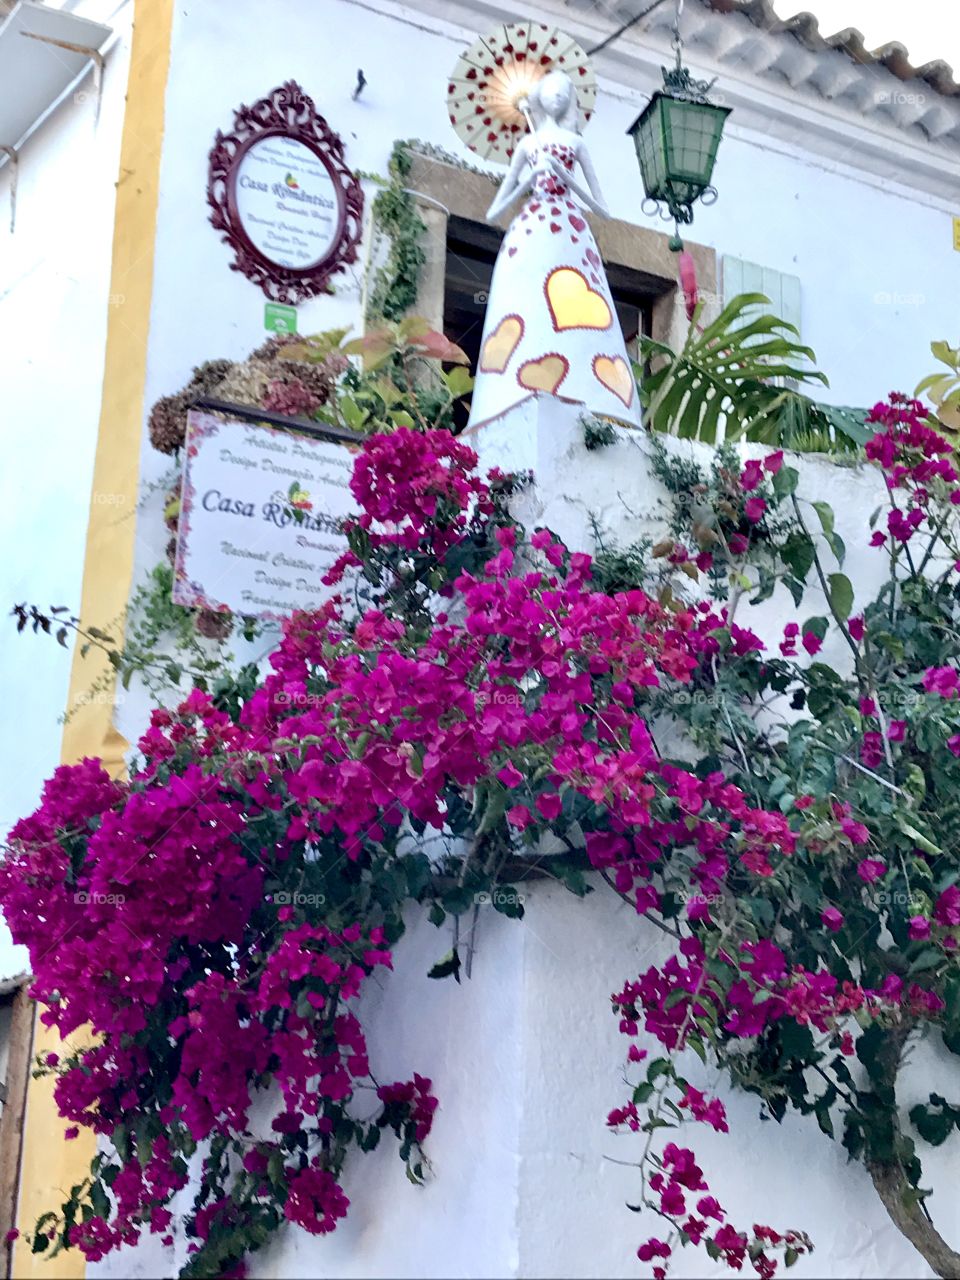 Flowers at the entrance of a restaurant in Portugal